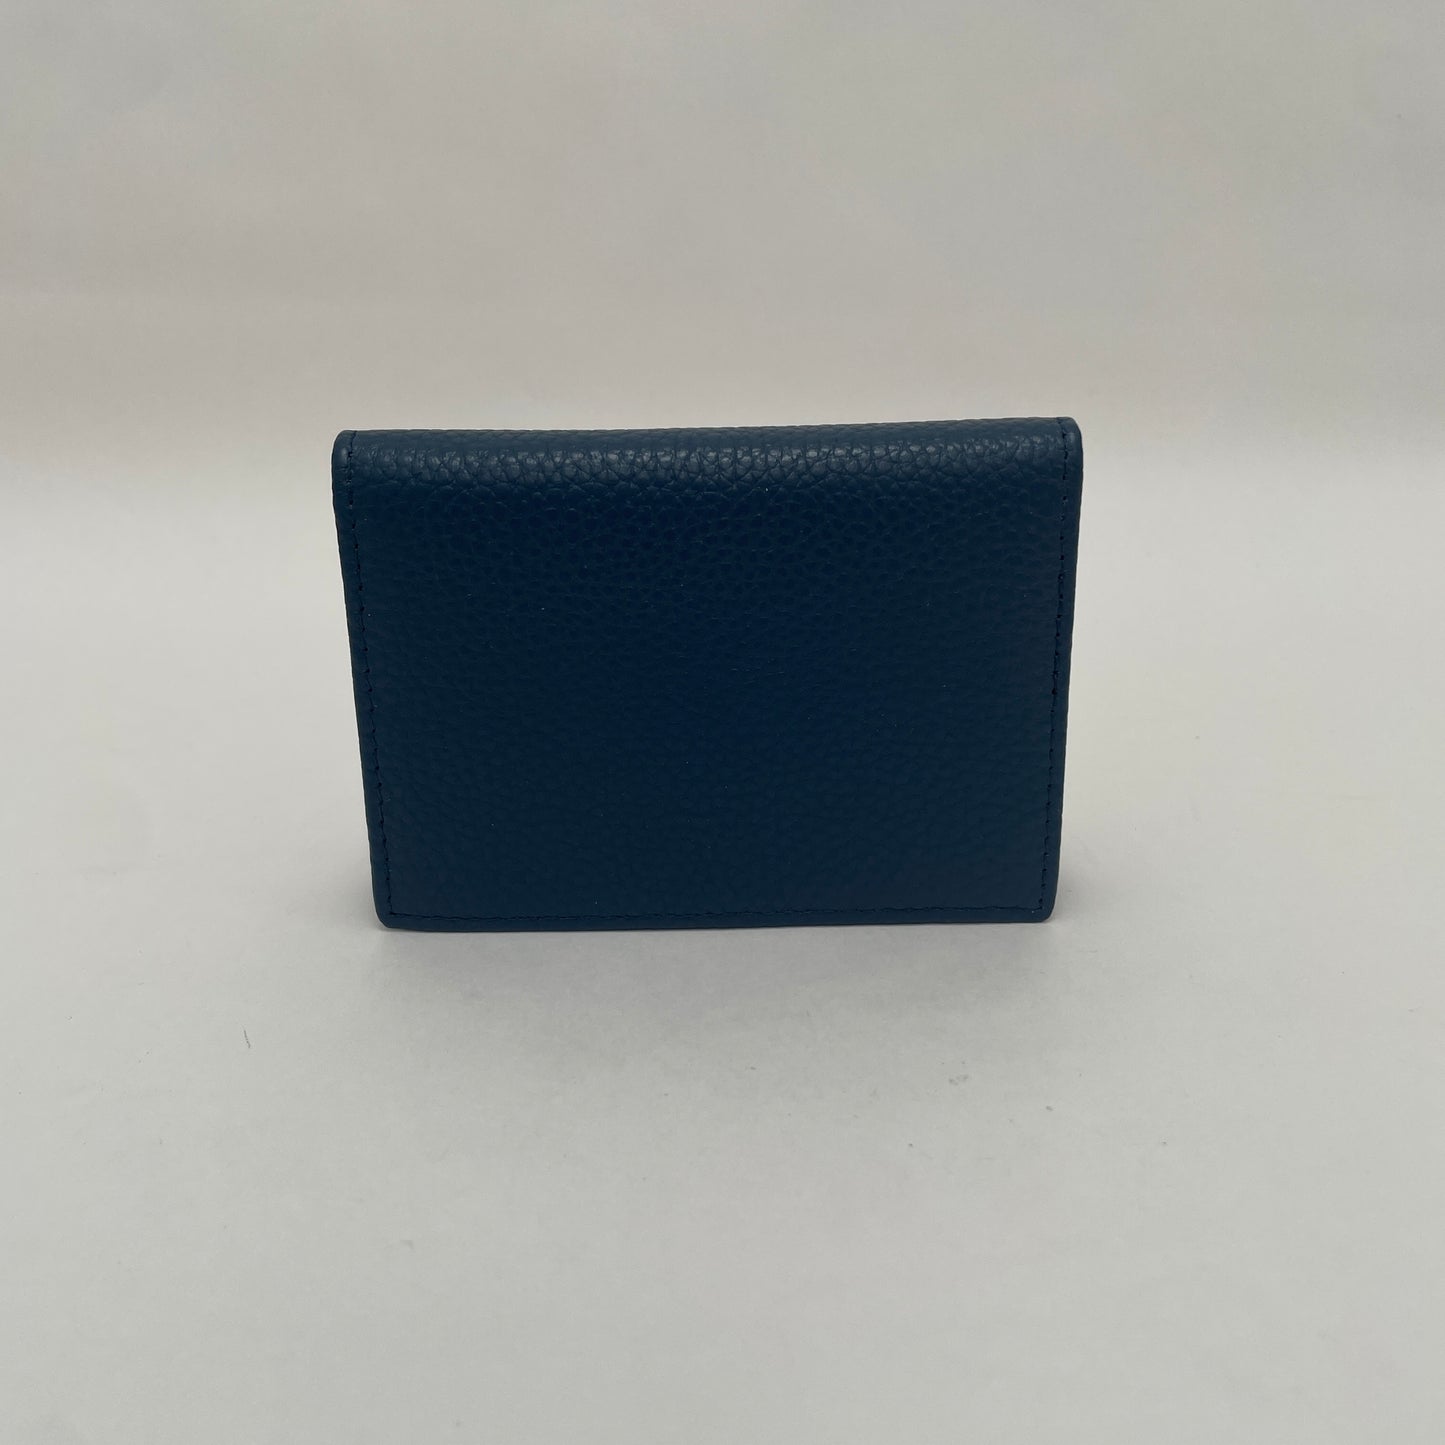 PROMENADE LEATHER BUSINESS CARD HOLDER NAVY